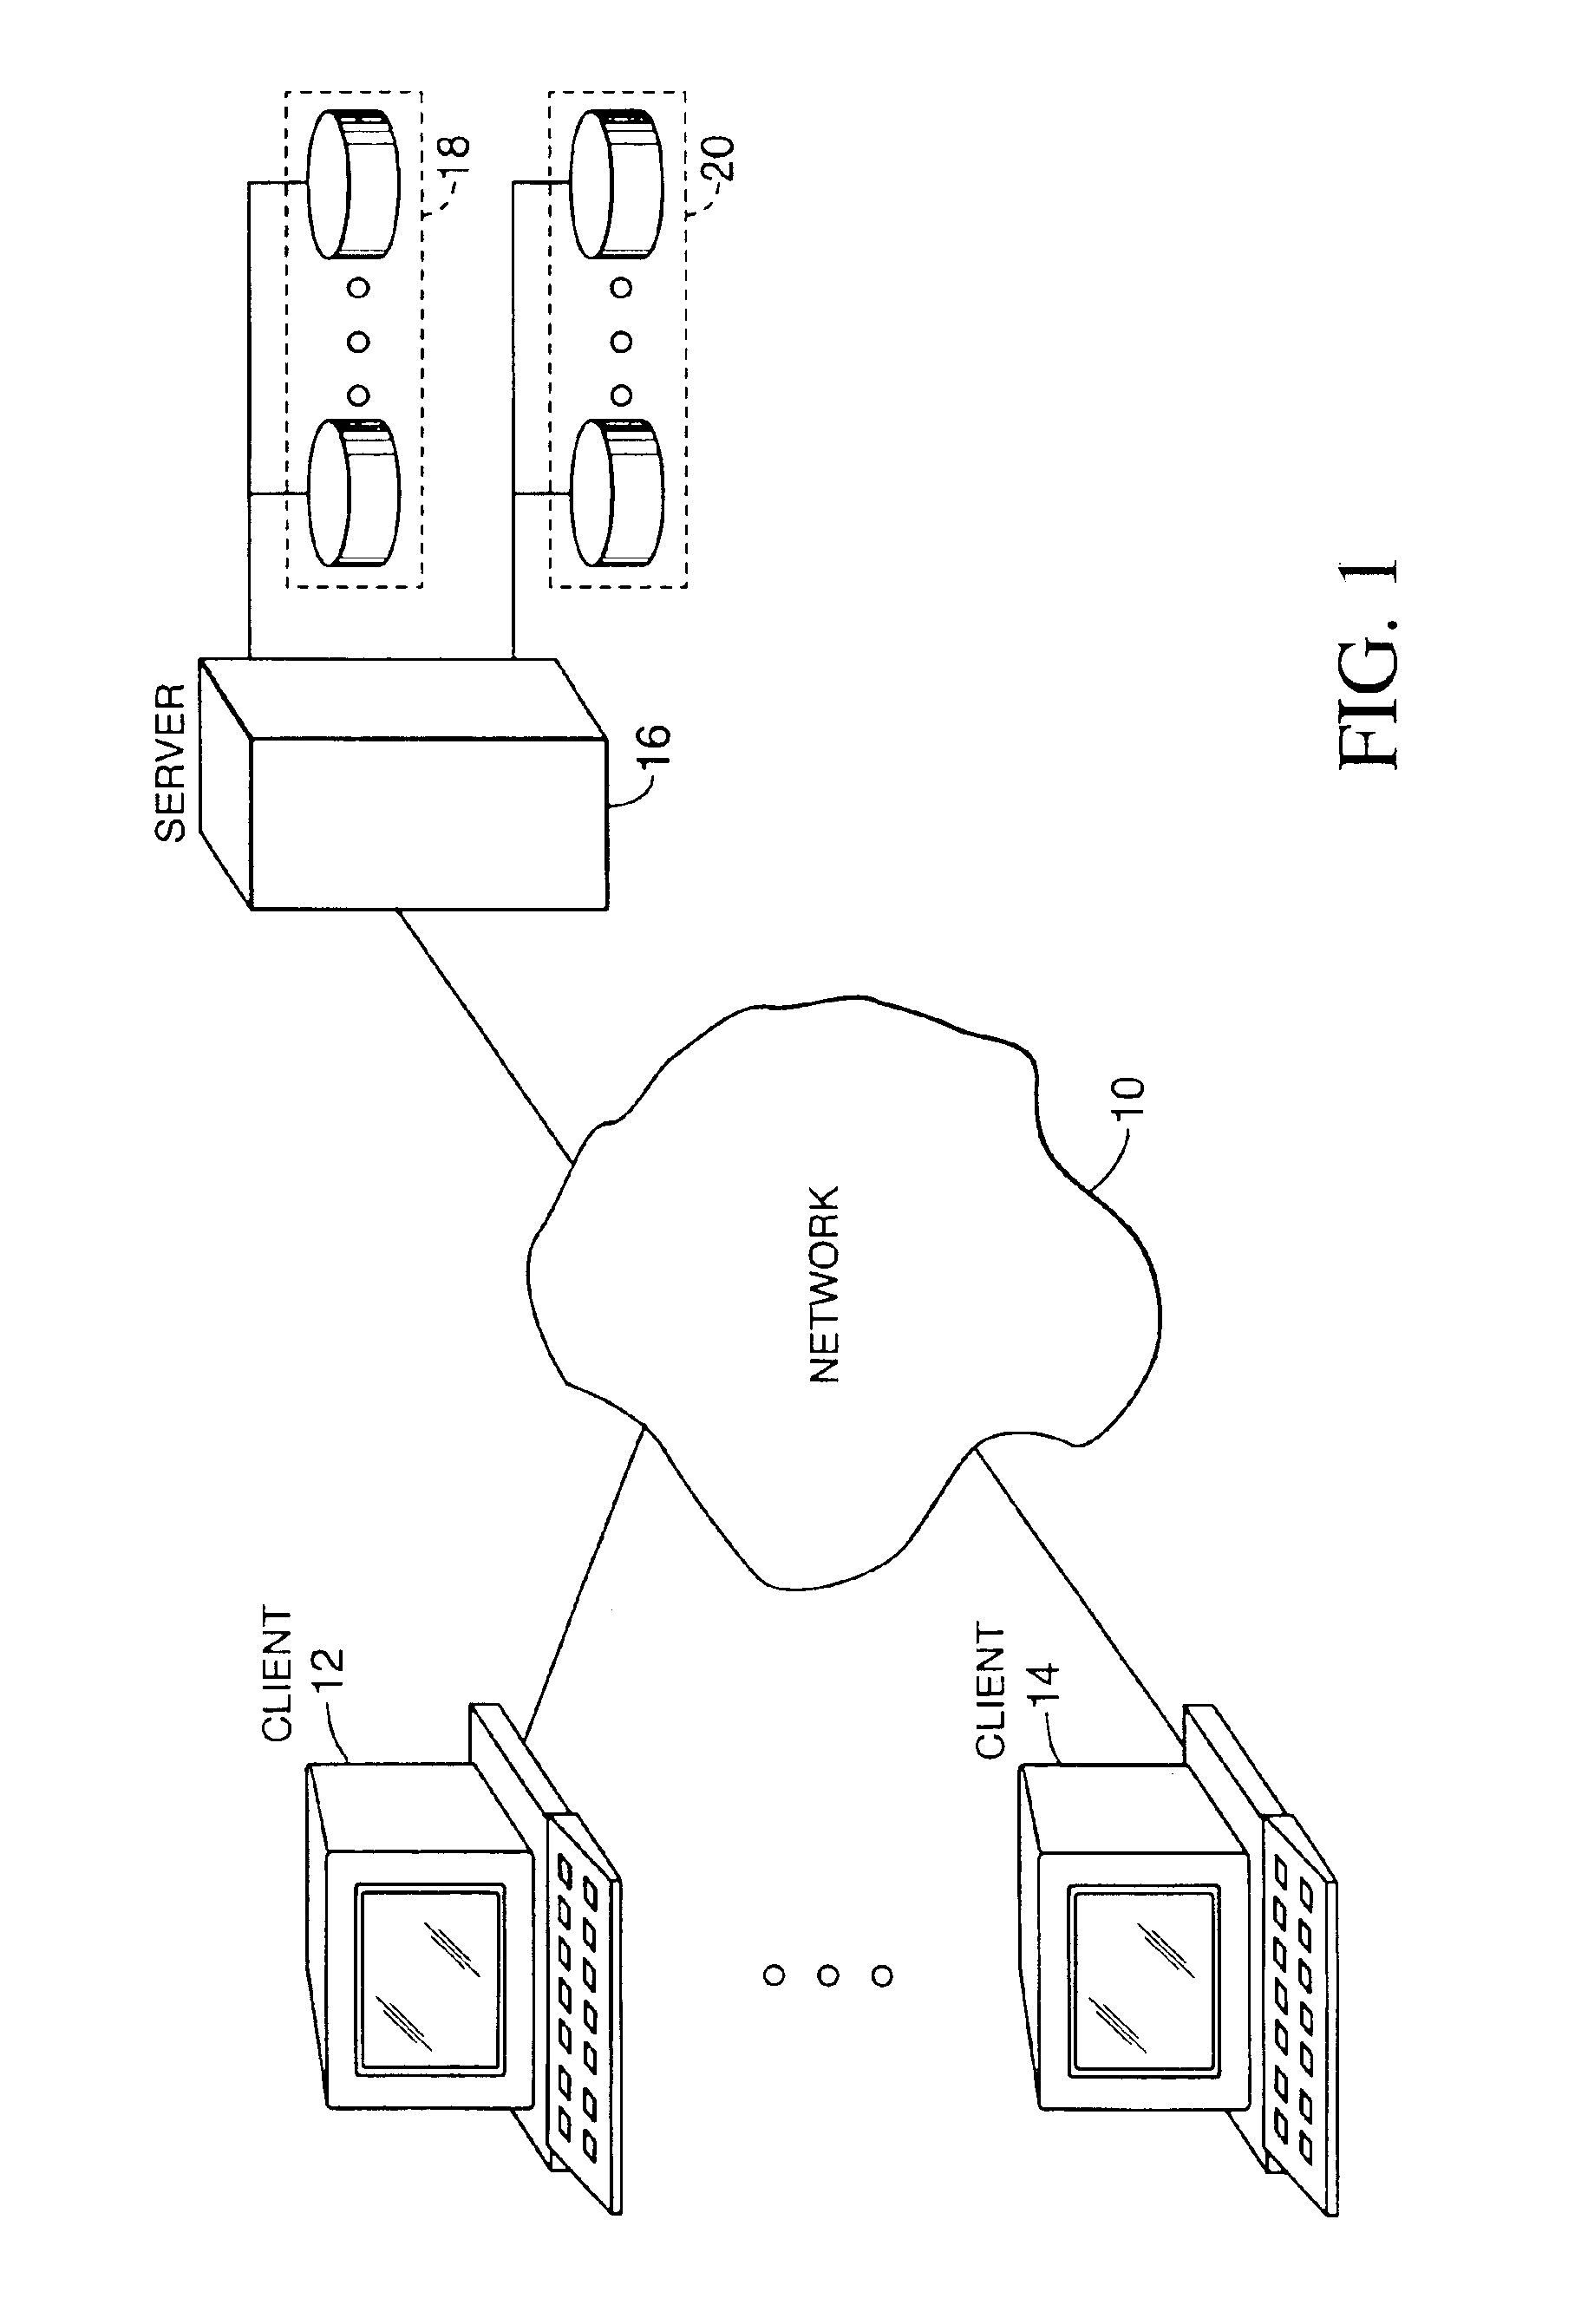 Method of mixed workload high performance scheduling